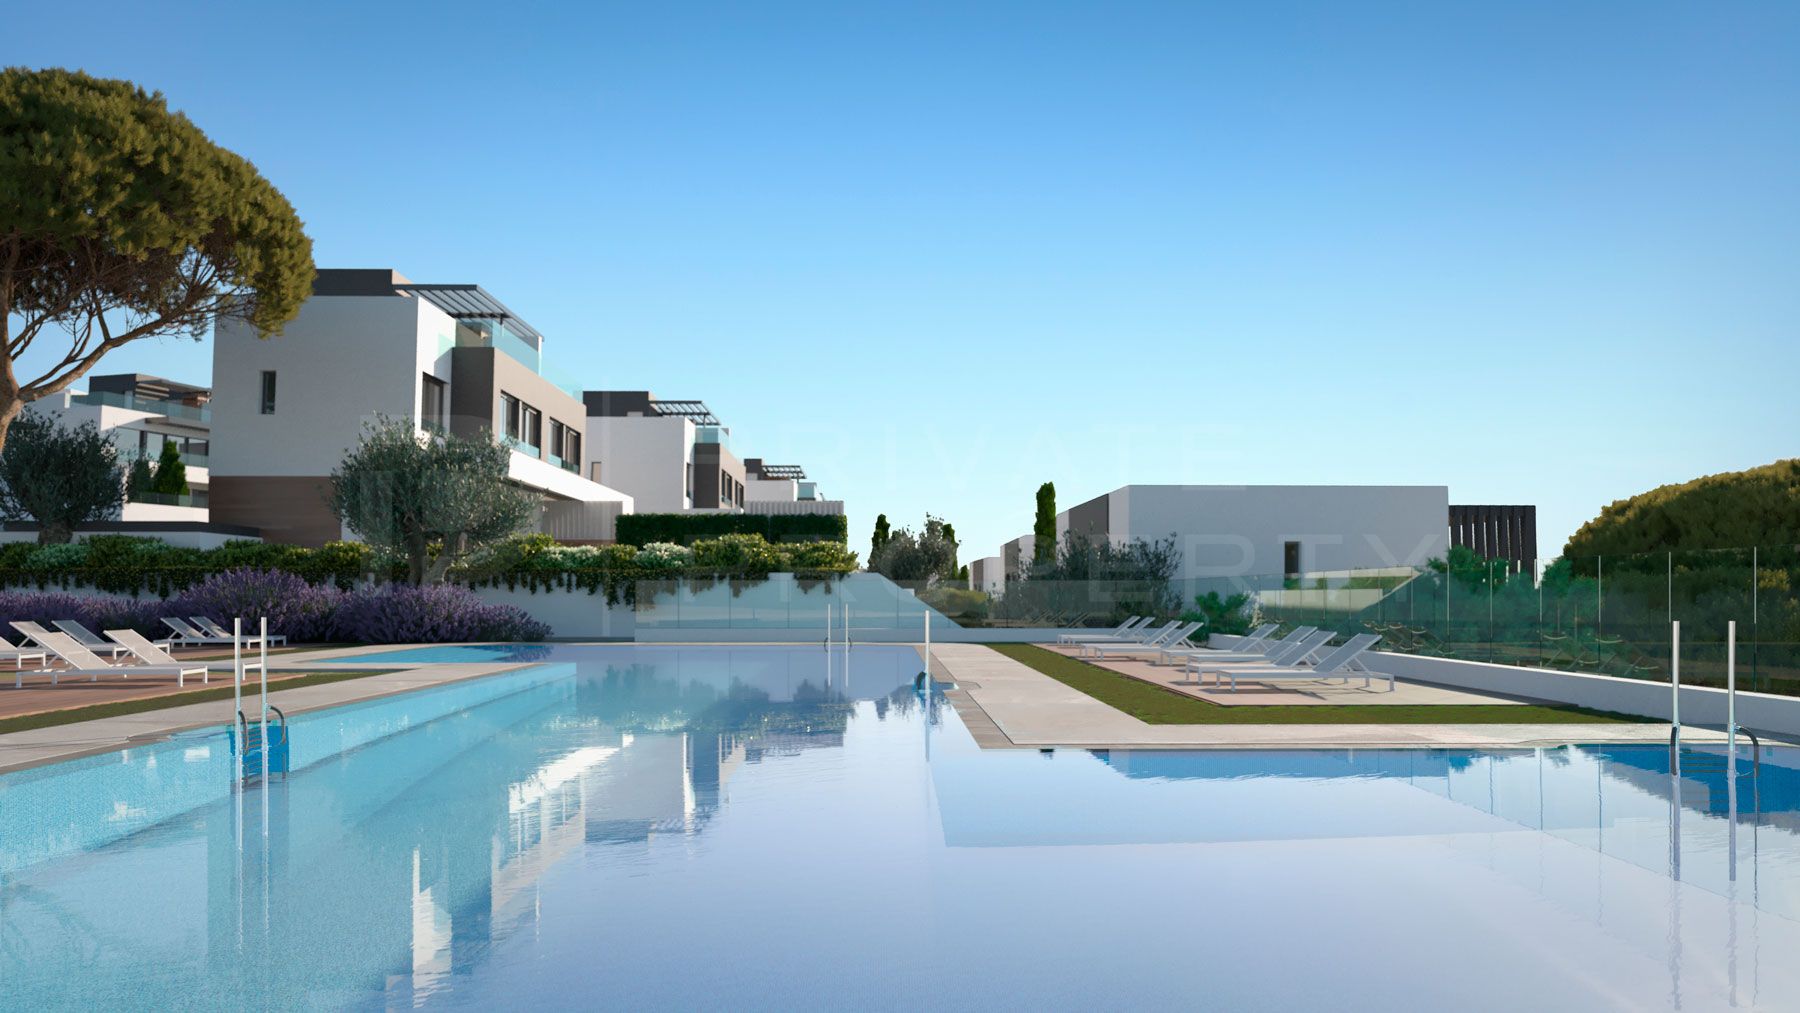 50 First Line Golf semi-detached villas. Located next to the Atalaya Golf Country Club